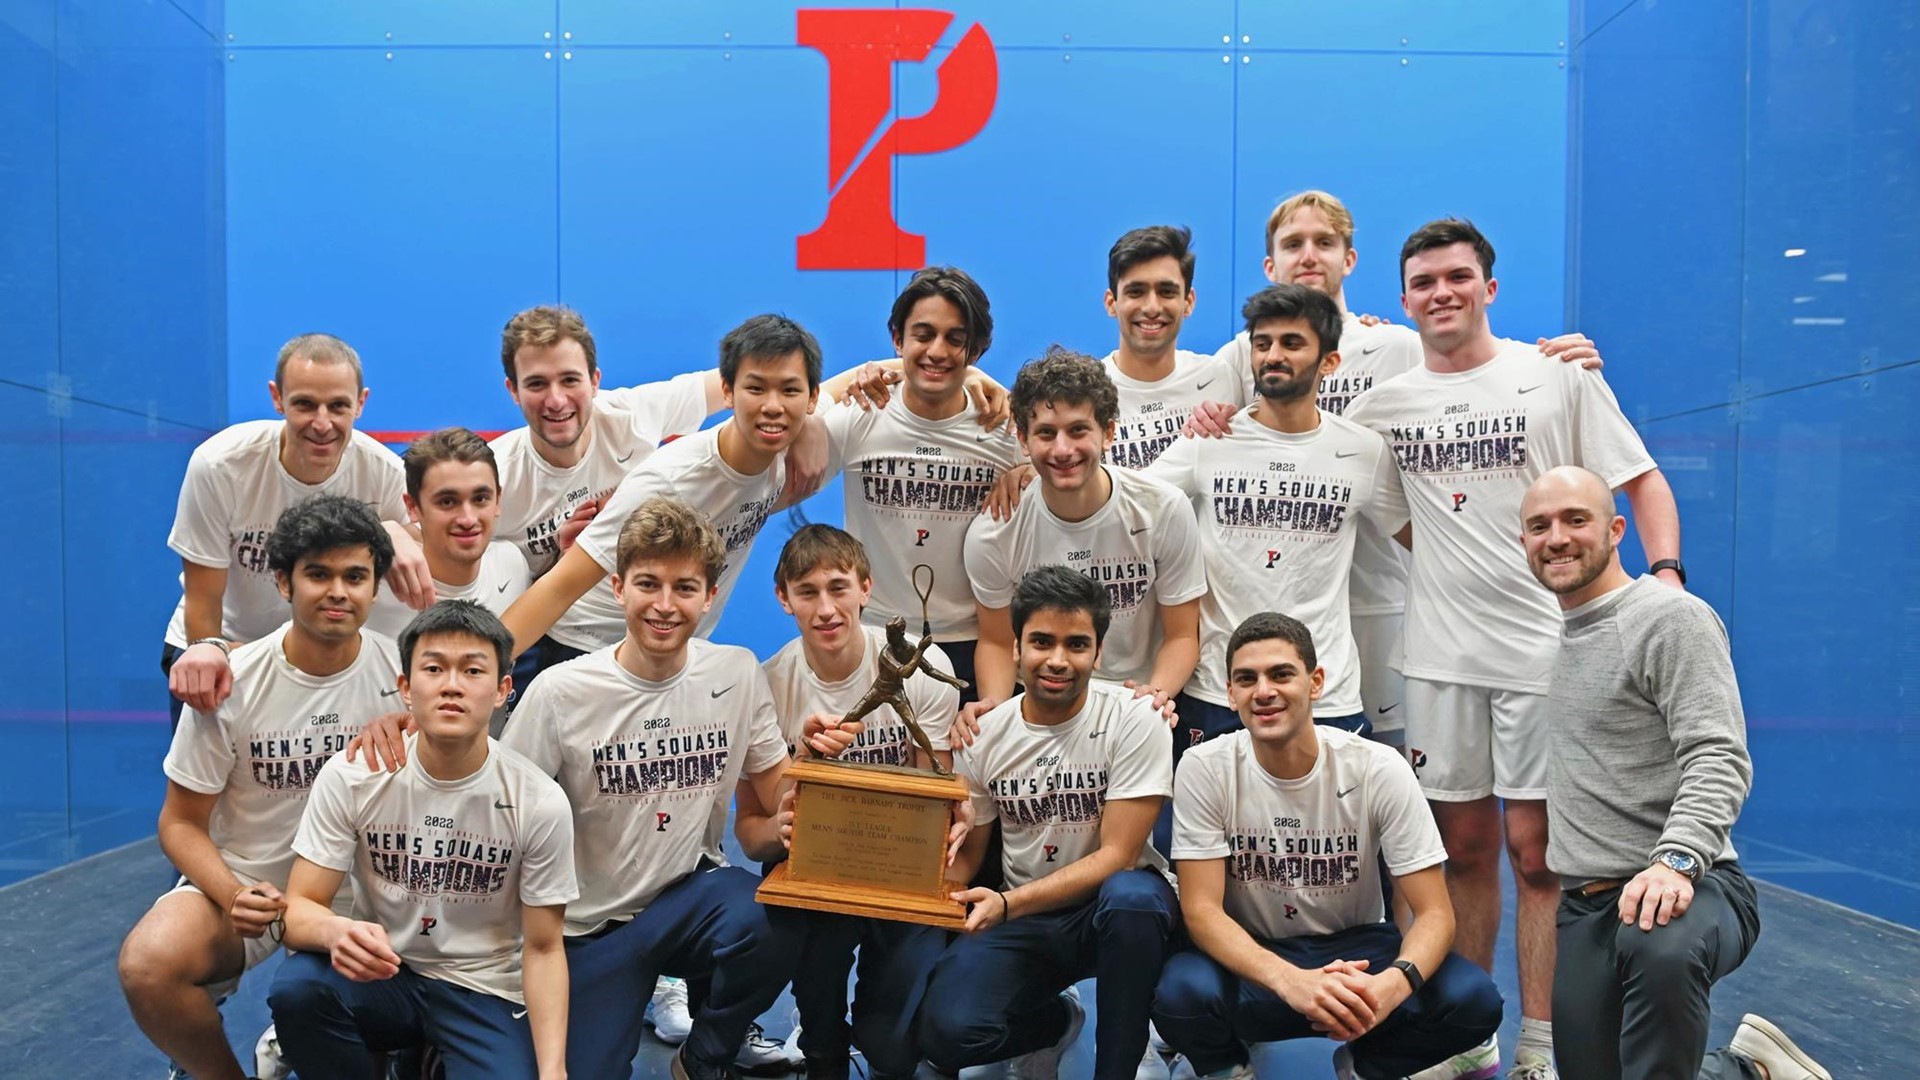 Members of the squash team pose at the Penn Squash Center with their championship trophy.